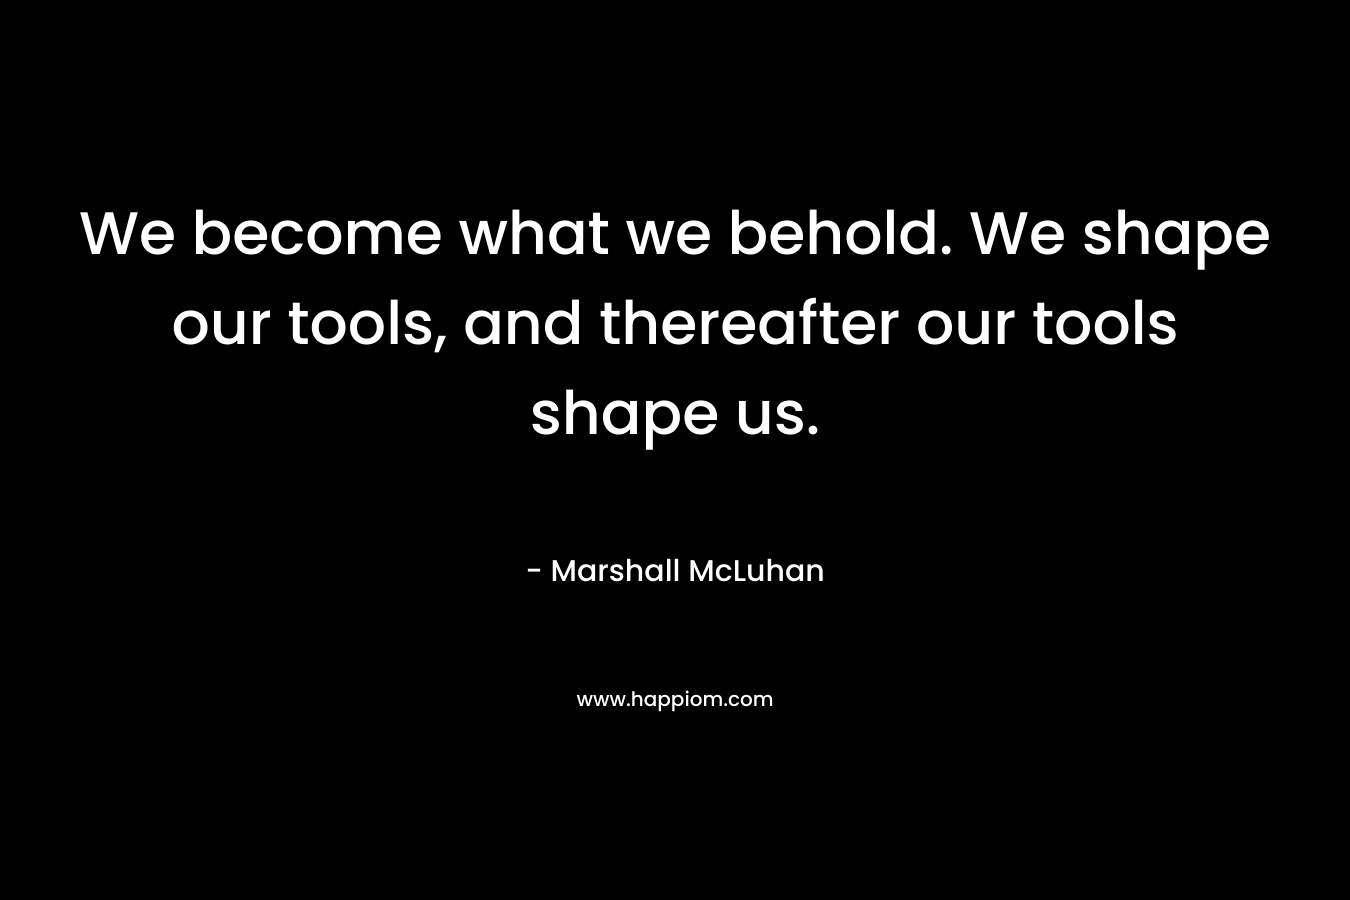 We become what we behold. We shape our tools, and thereafter our tools shape us. – Marshall McLuhan